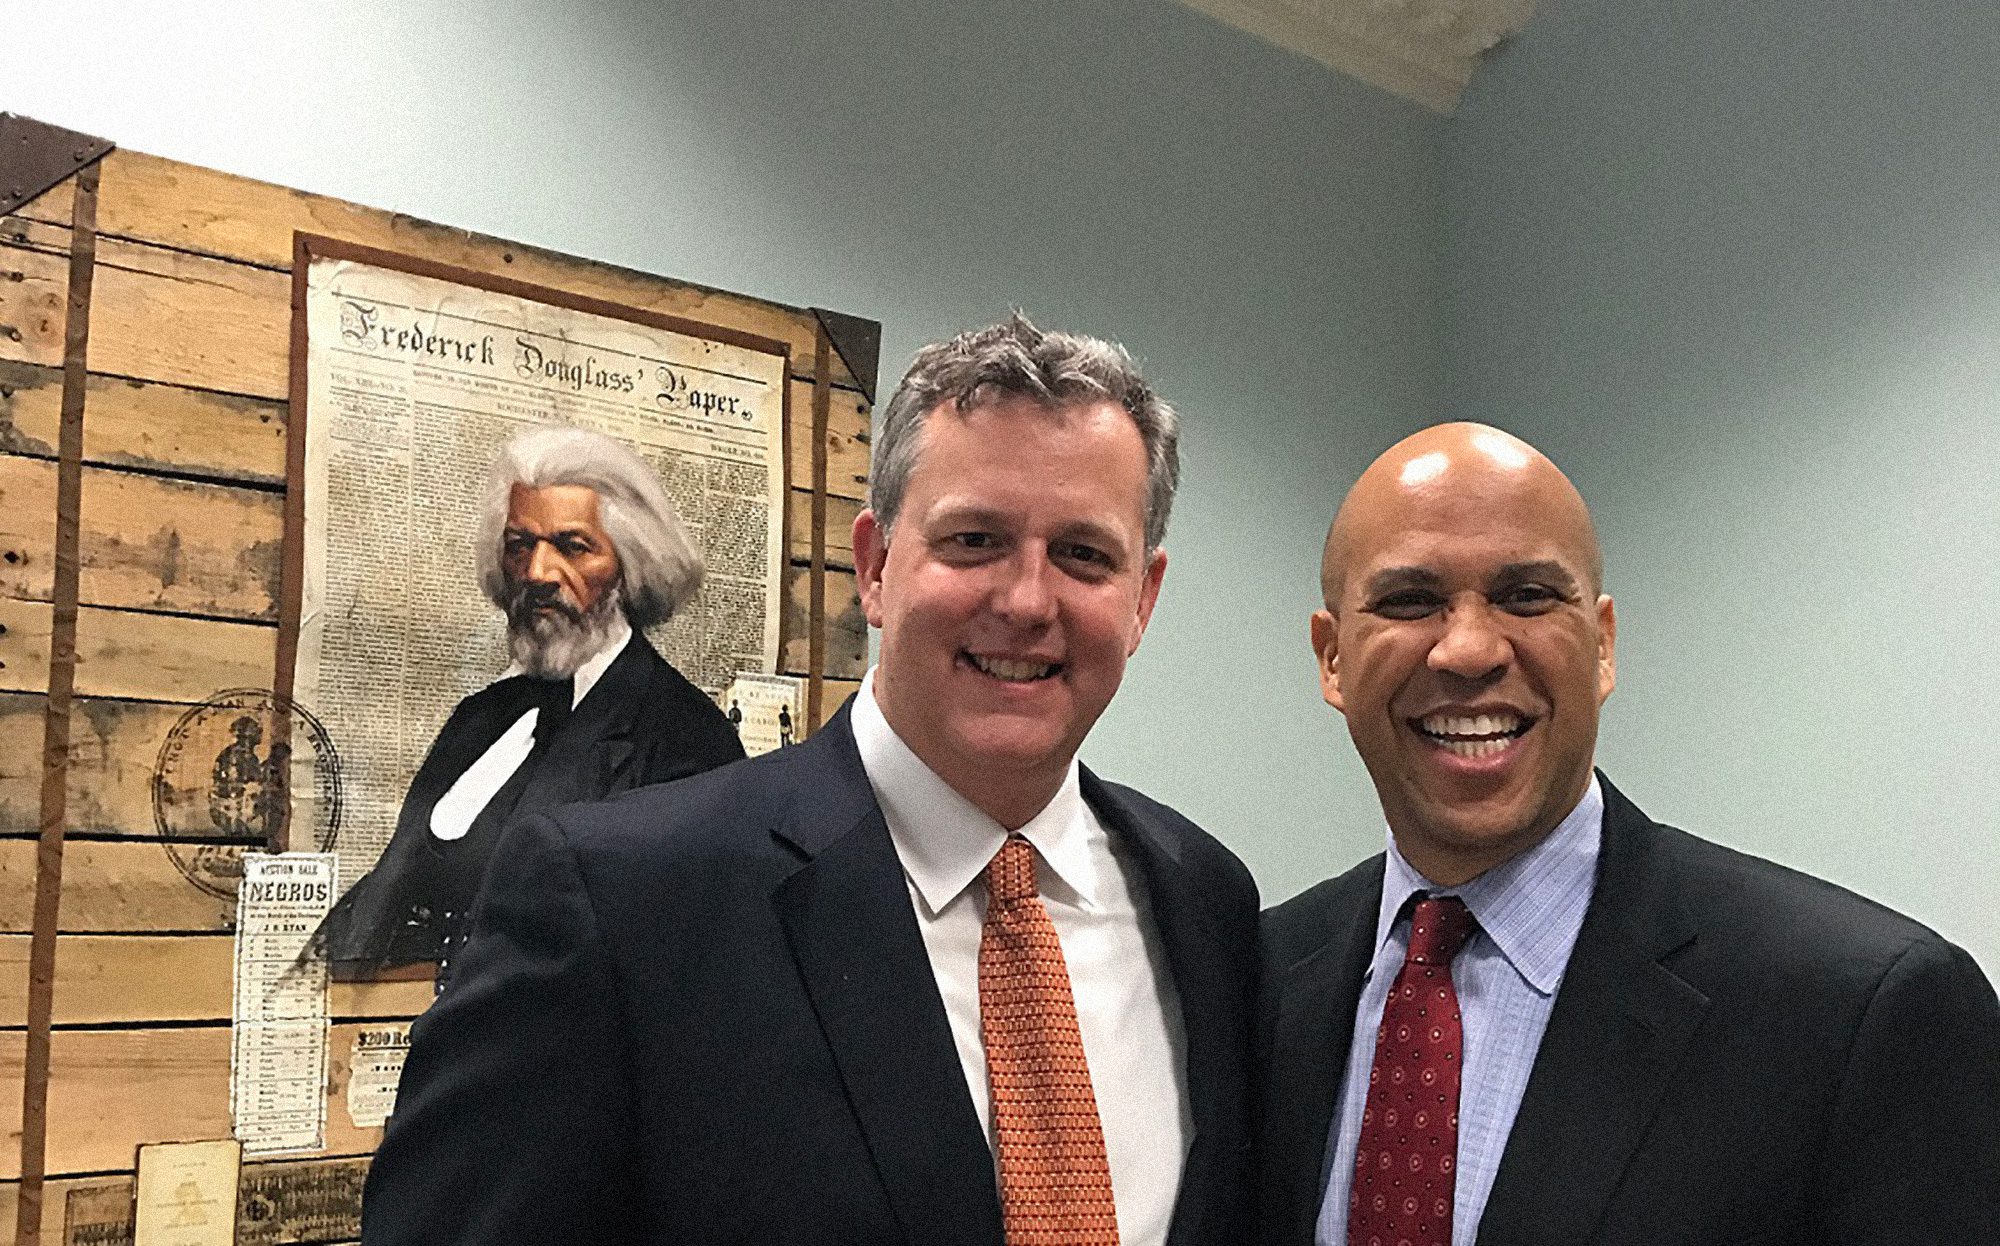 Humanities Council chair Eric Gregory with New Jersey Senator Cory Booker